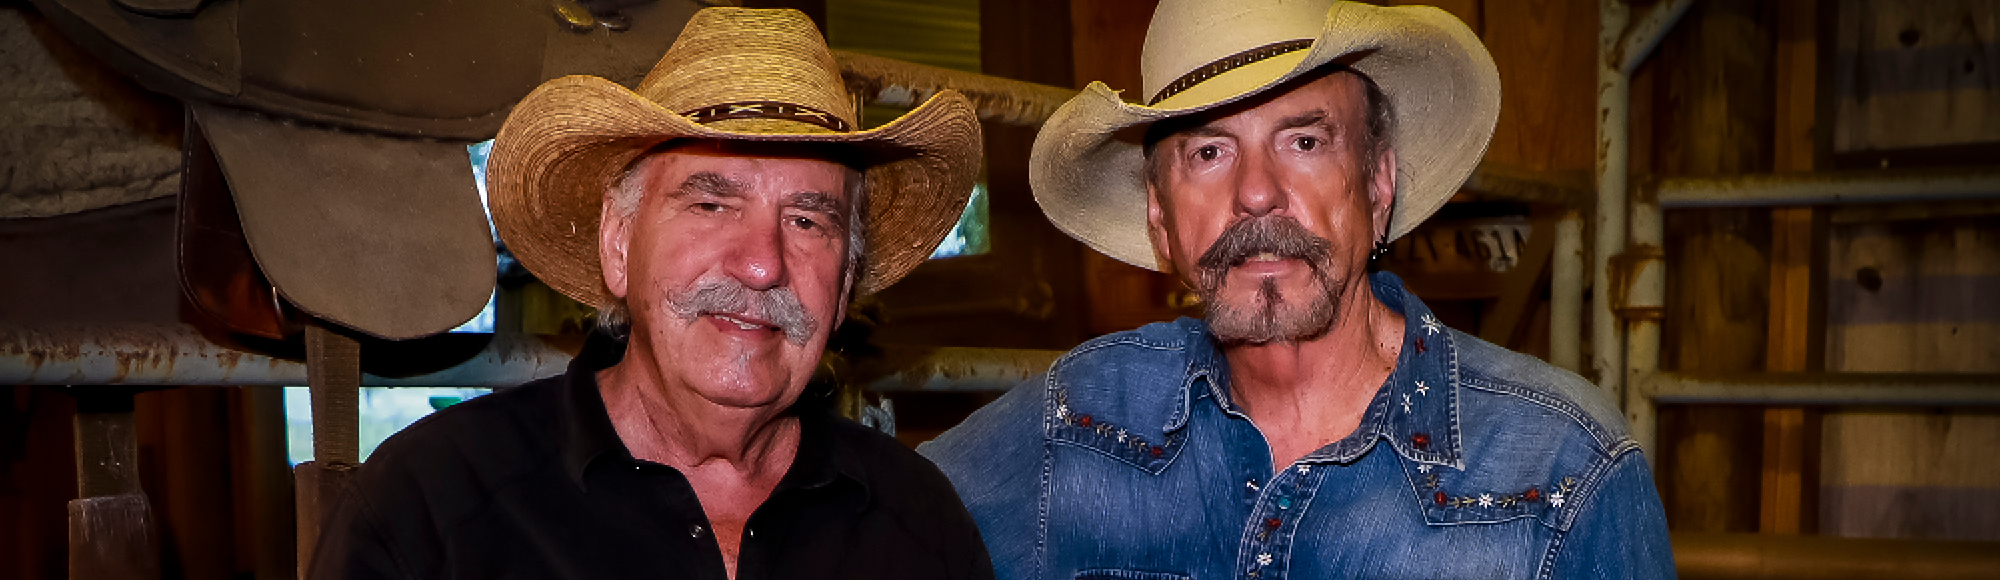 The Bellamy Brothers show